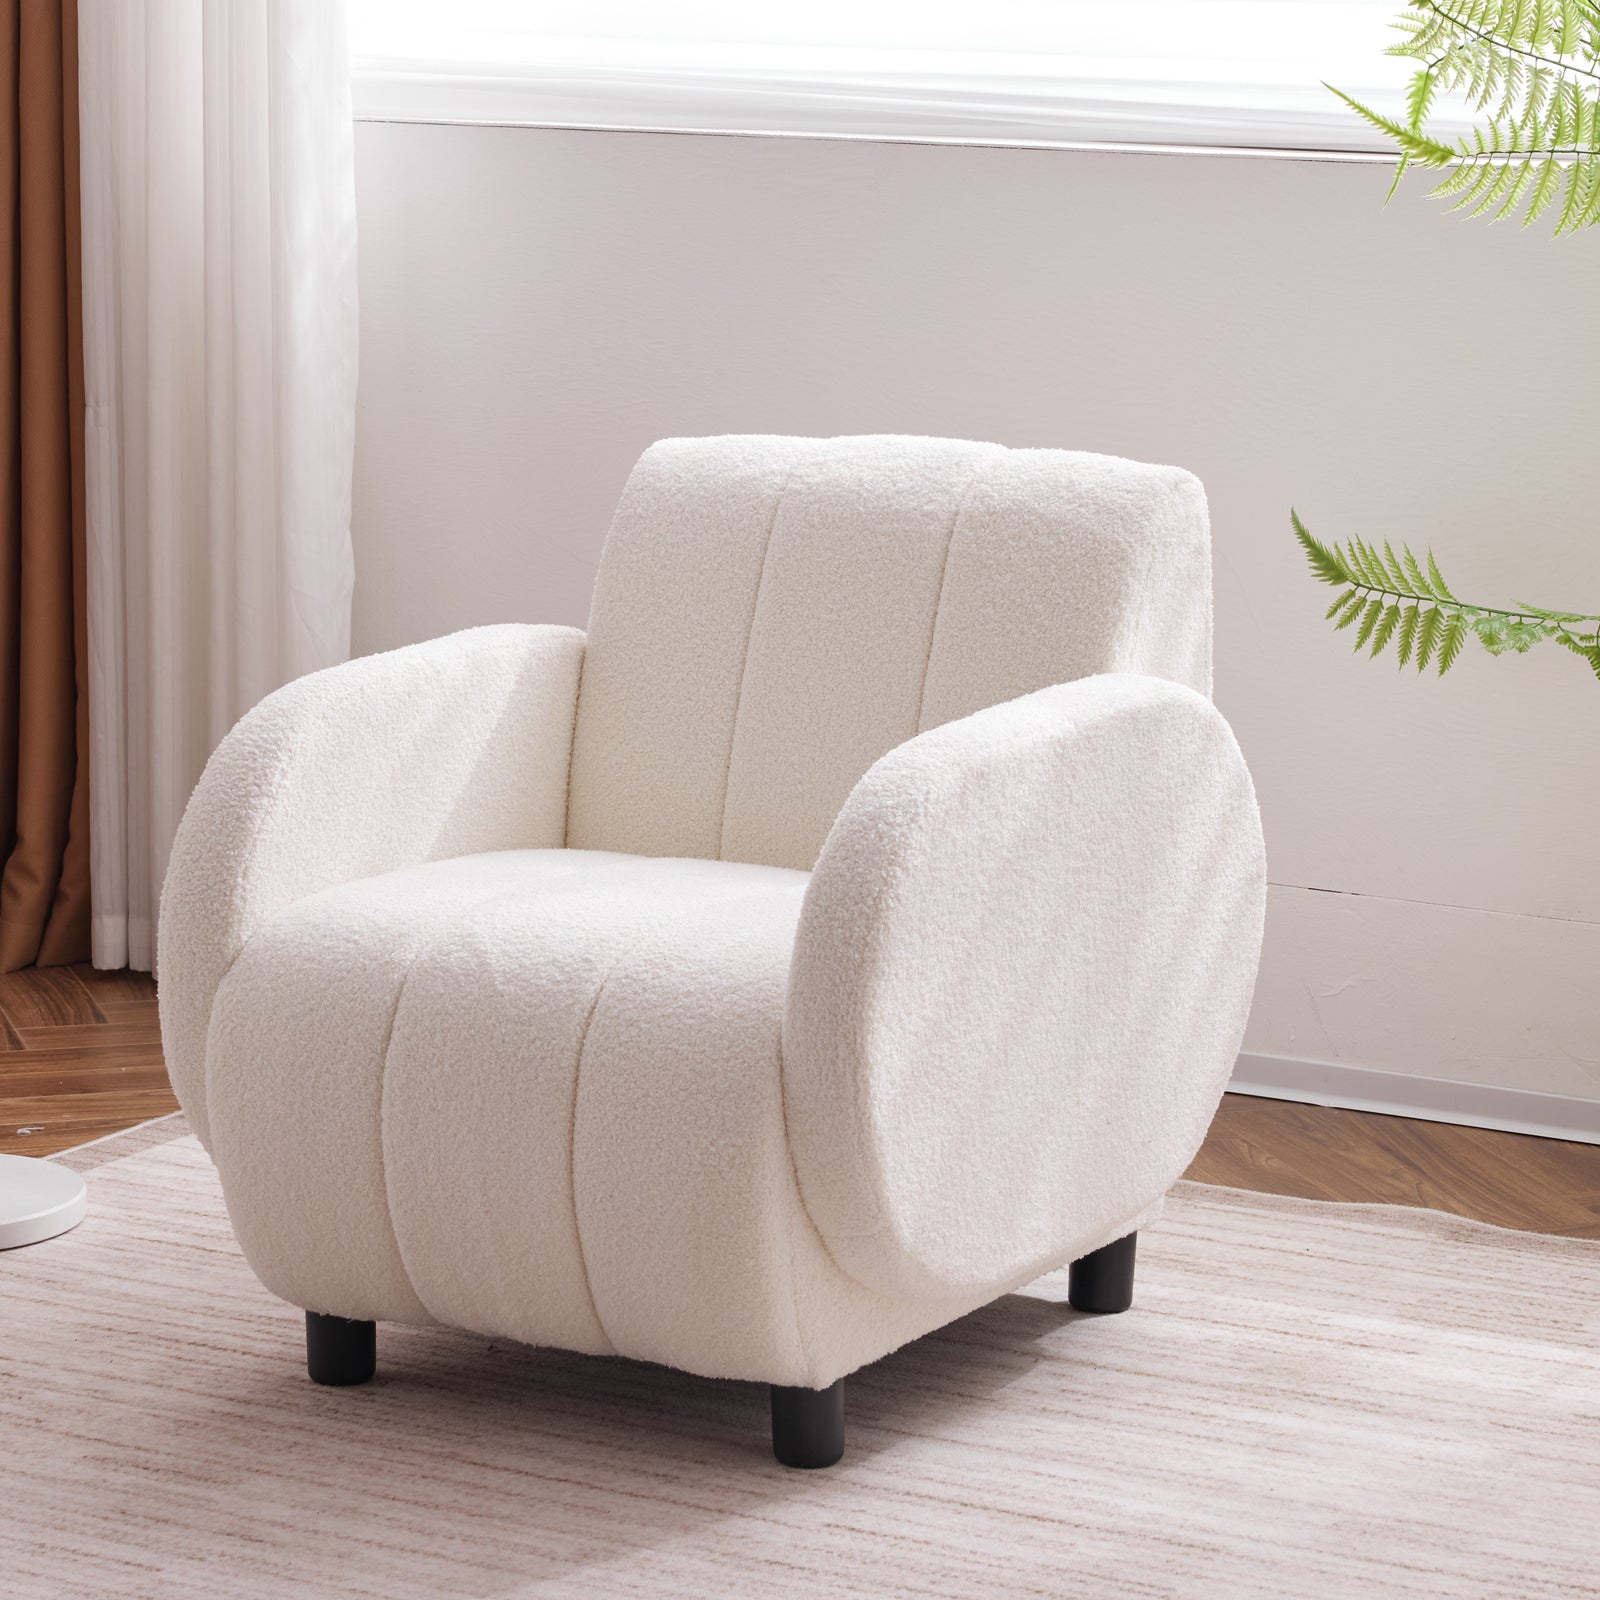 Bellemave Modern Fabric Upholstered Armchair with Upholstered Reading Chair